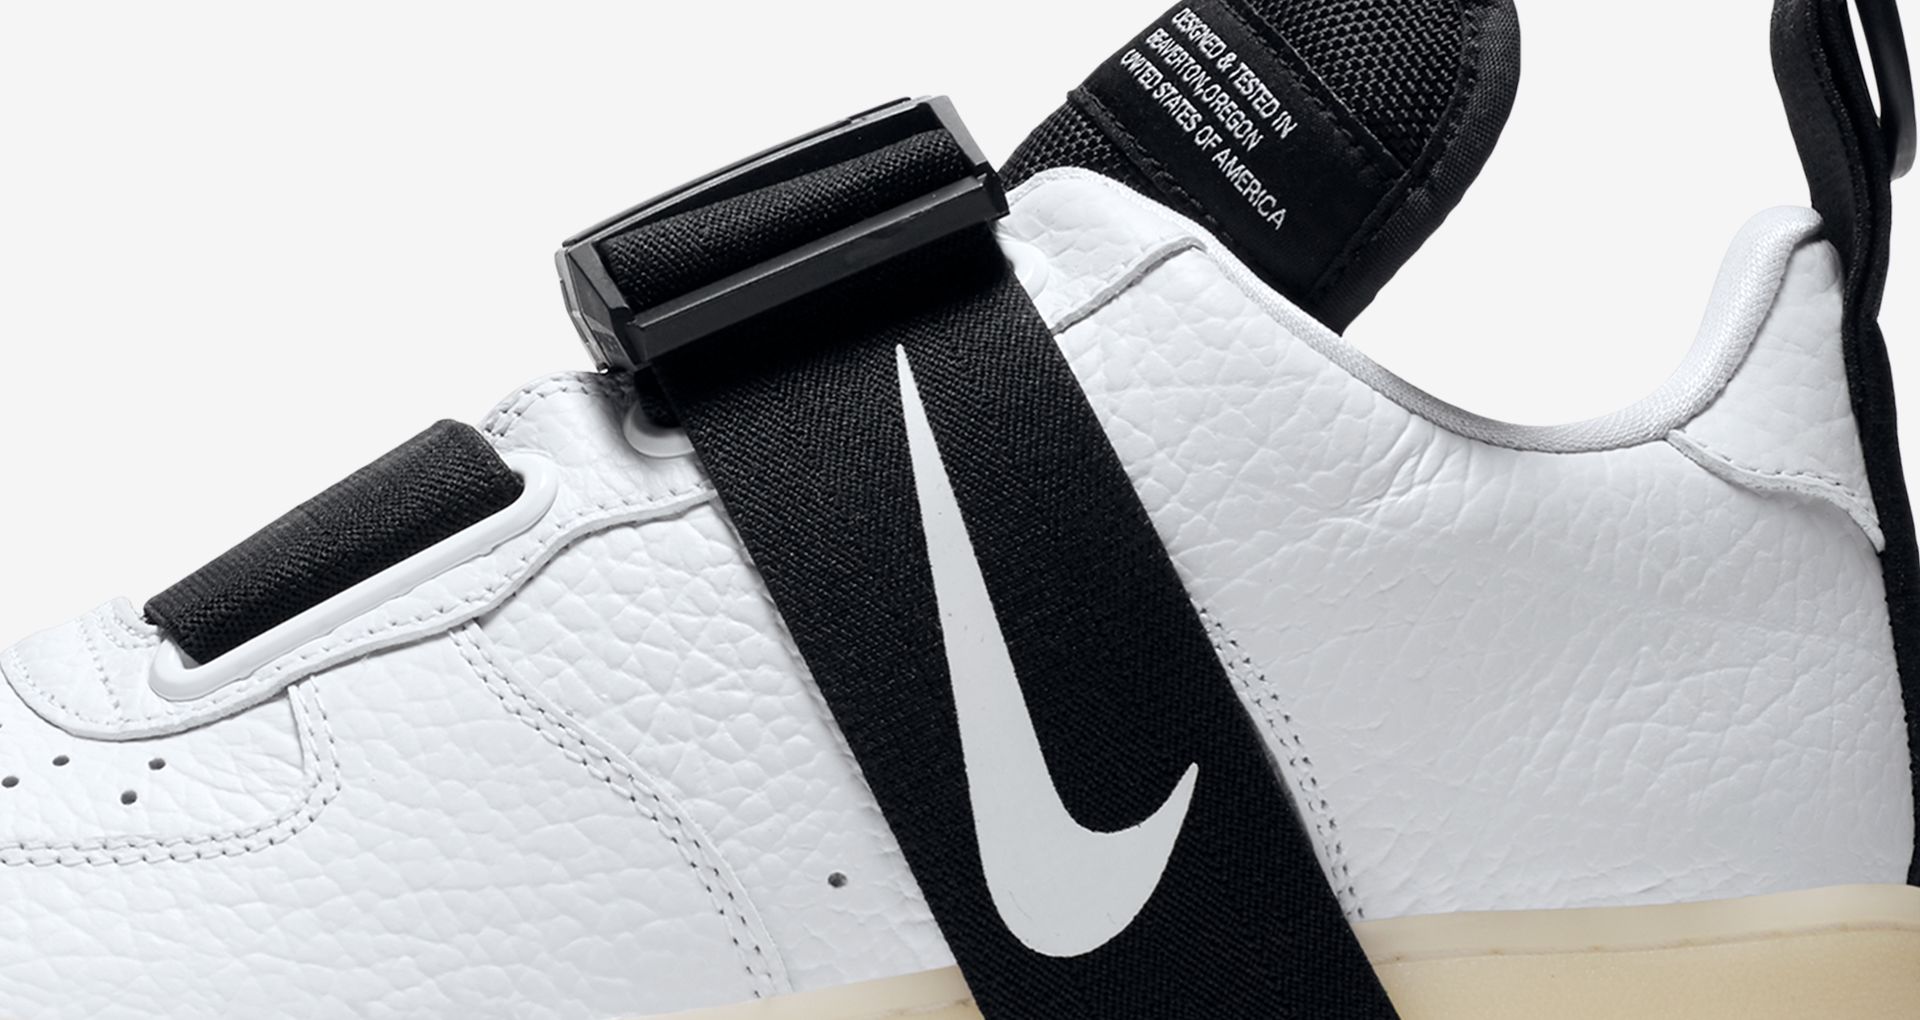 Nike Air Force 1 Utility 'White & Black' Release Date. Nike SNKRS